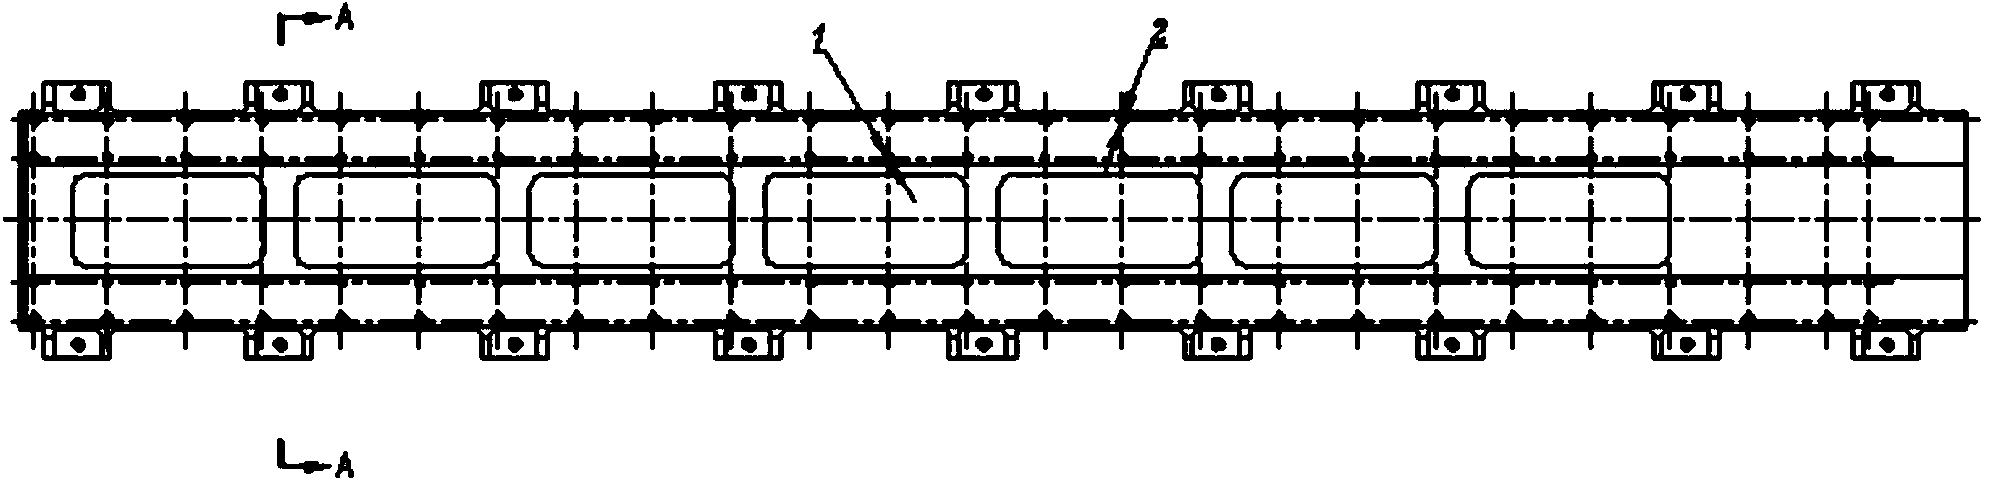 Processing and assembling method for linear combined guide rail of box body